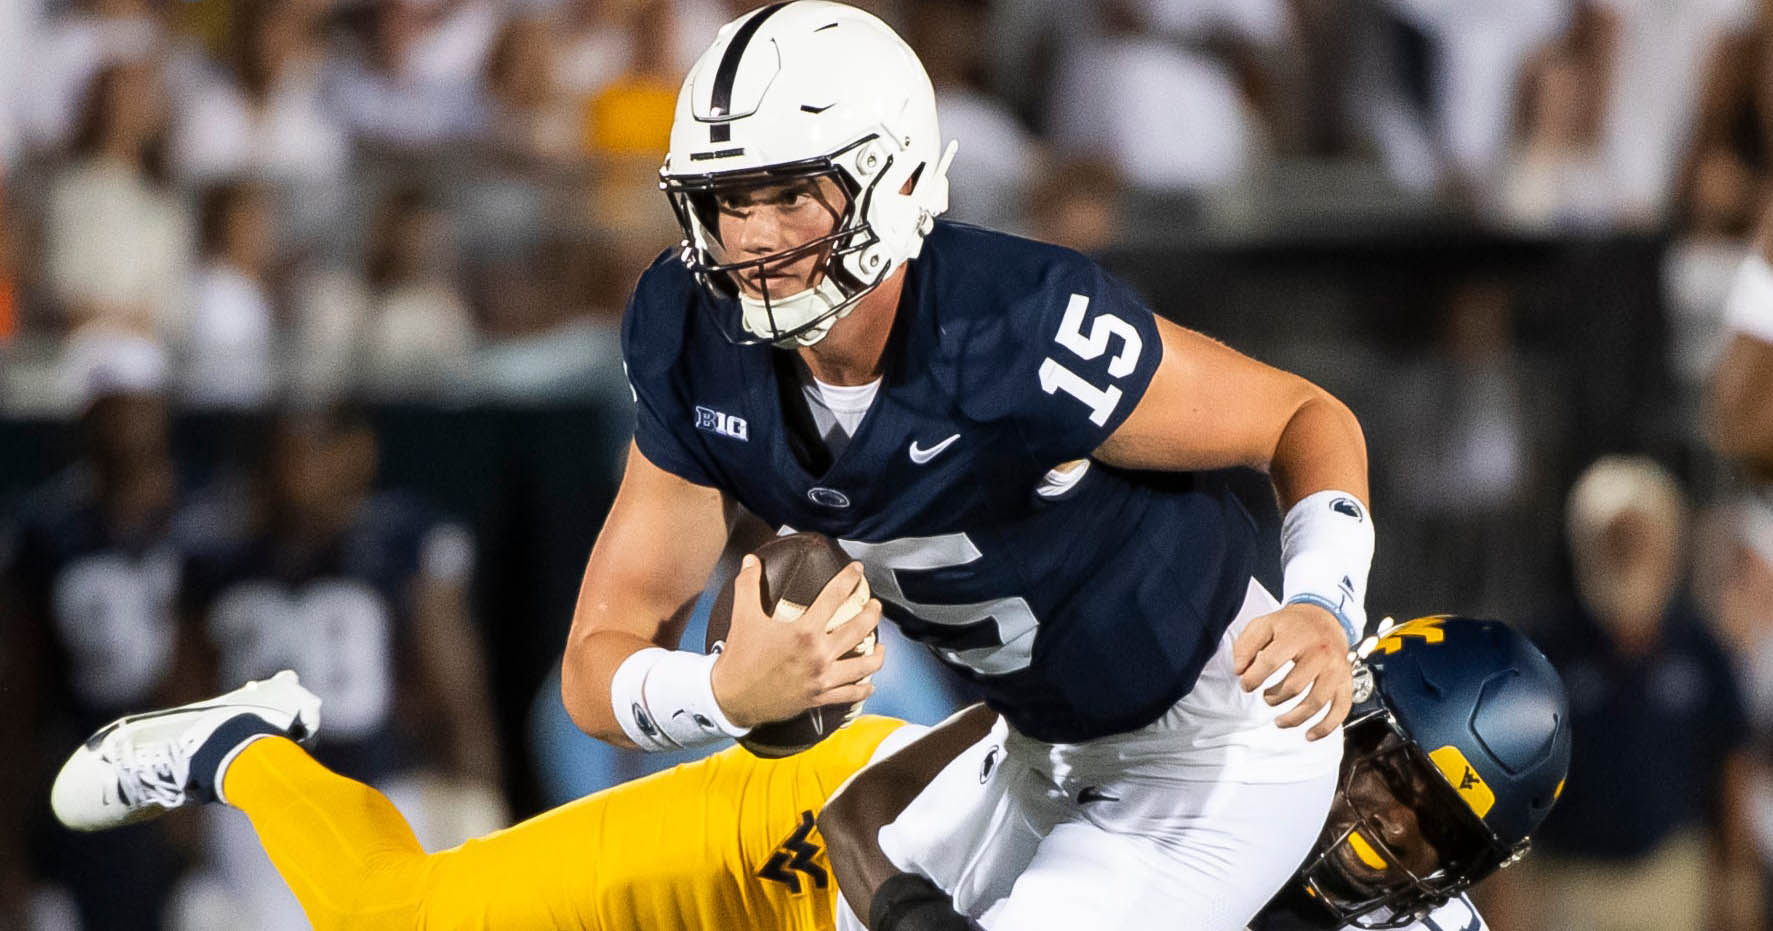 How did Penn State's players perform vs. West Virginia? PFF Snap Counts